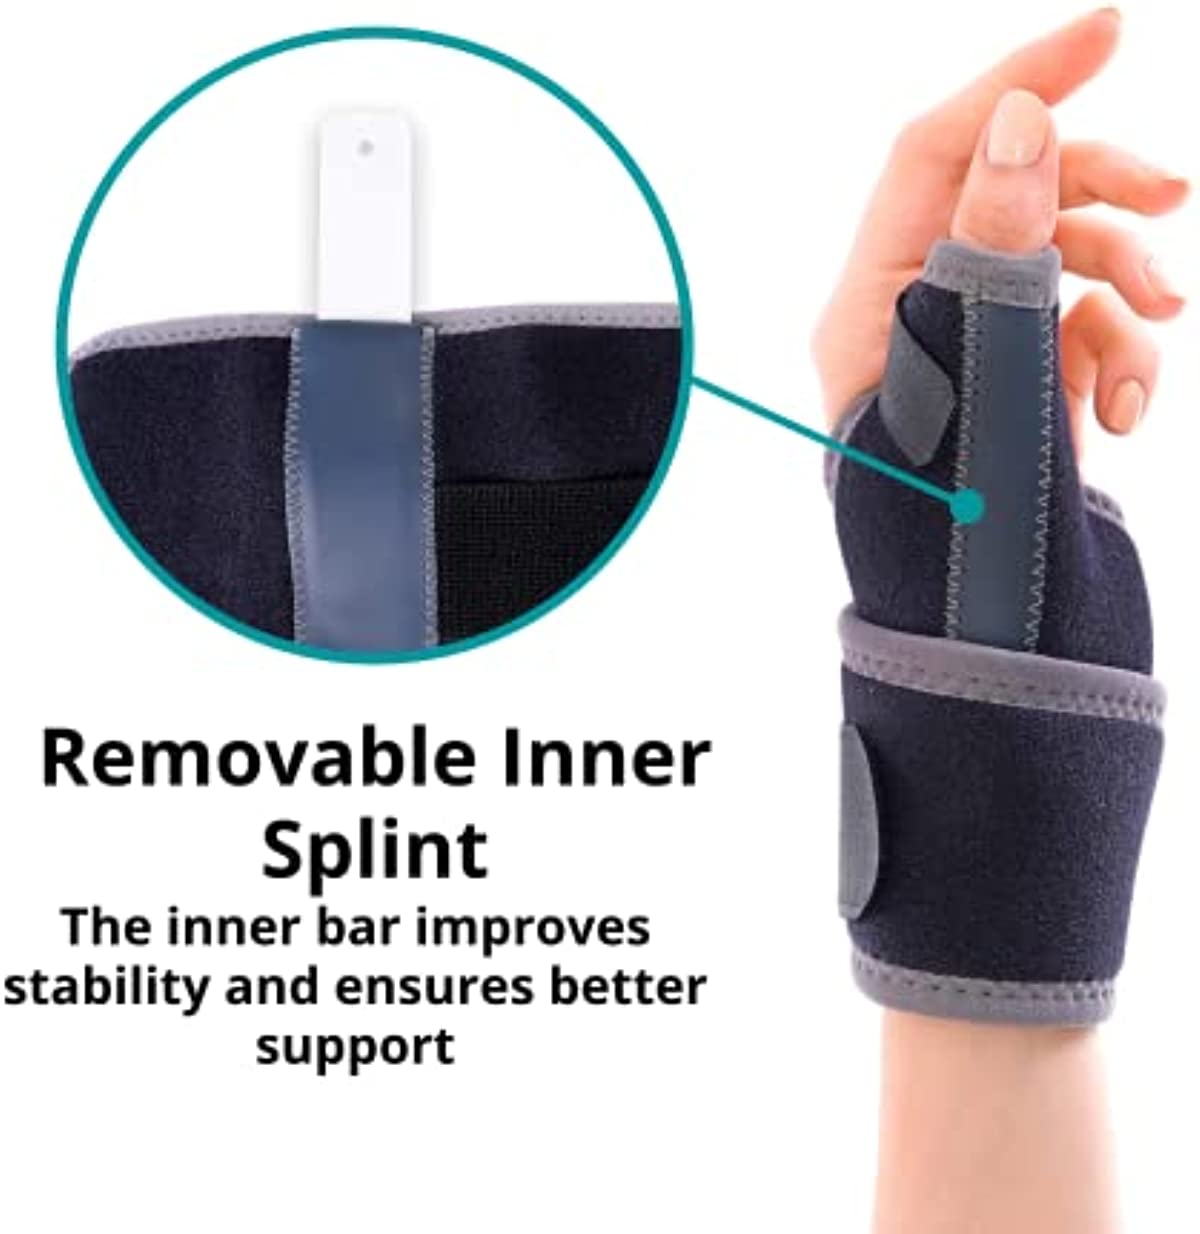 Adjustable Wrist Support Brace, Thumb Support Wrist Compression Brace with Removable Metal Splint for Carpal Tunnel, Arthritis, Tendonitis, Sprains (2)